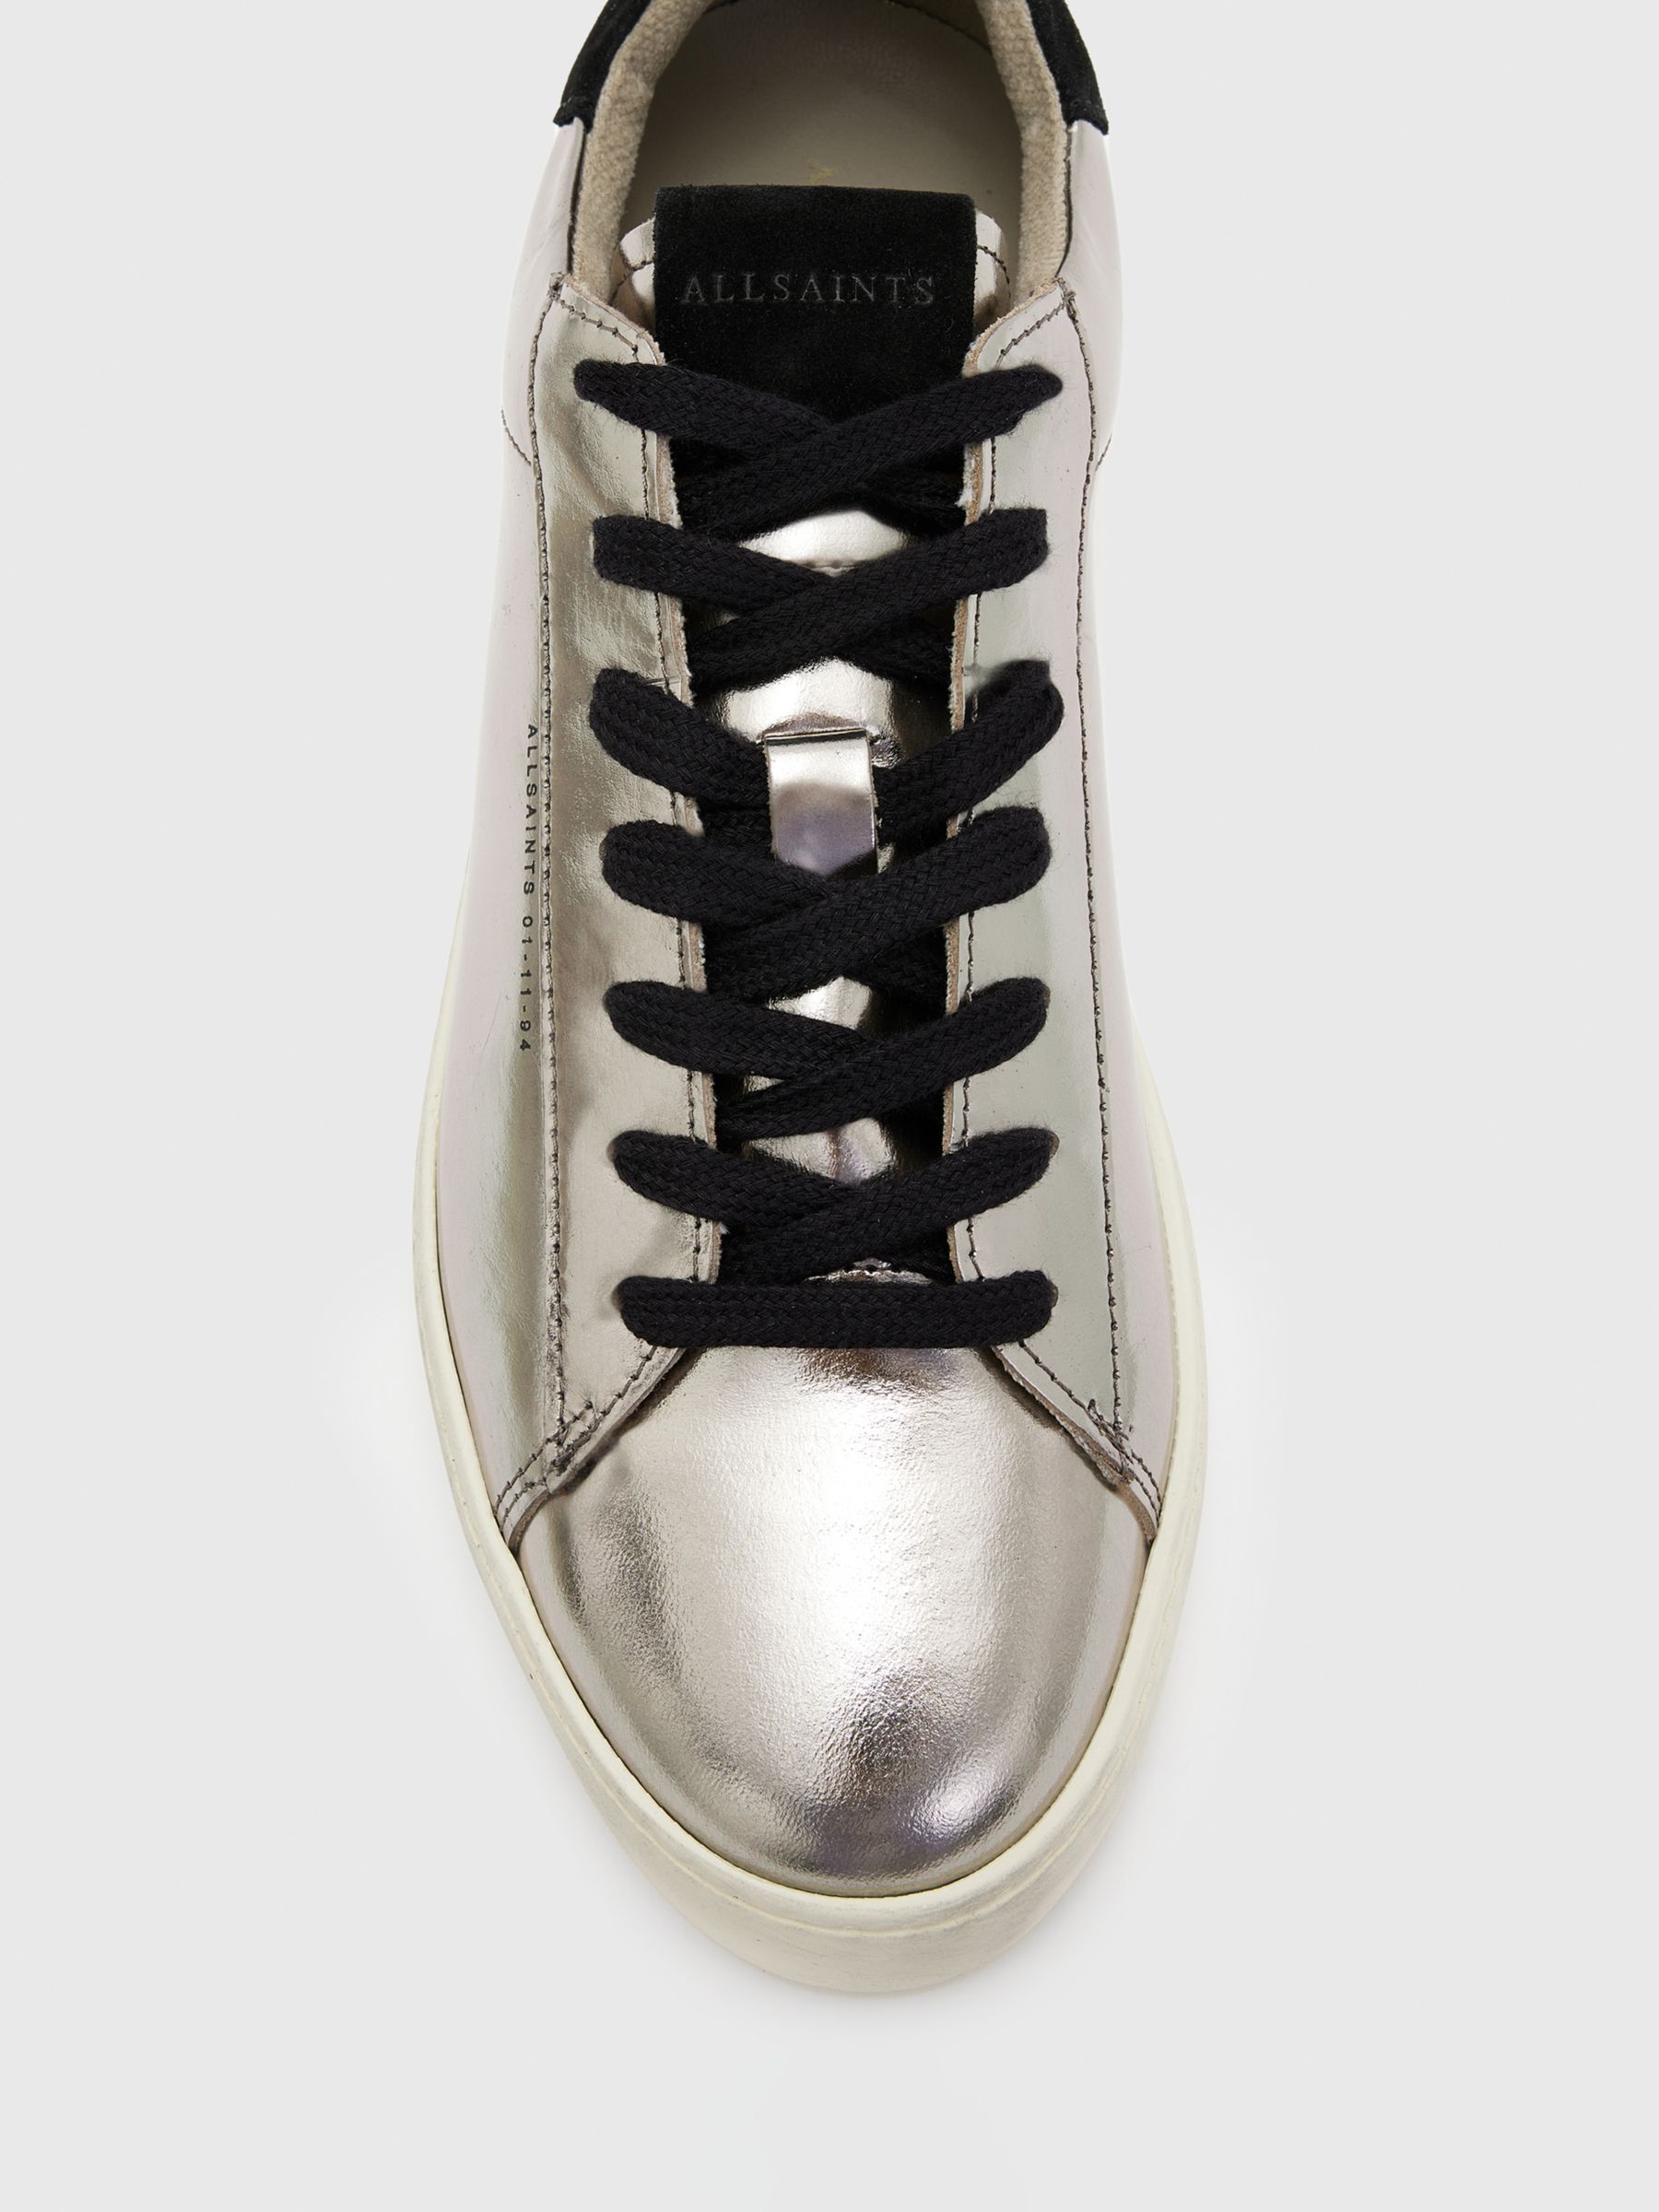 AllSaints Shana Leather Lace Up Trainers, Silver at John Lewis & Partners